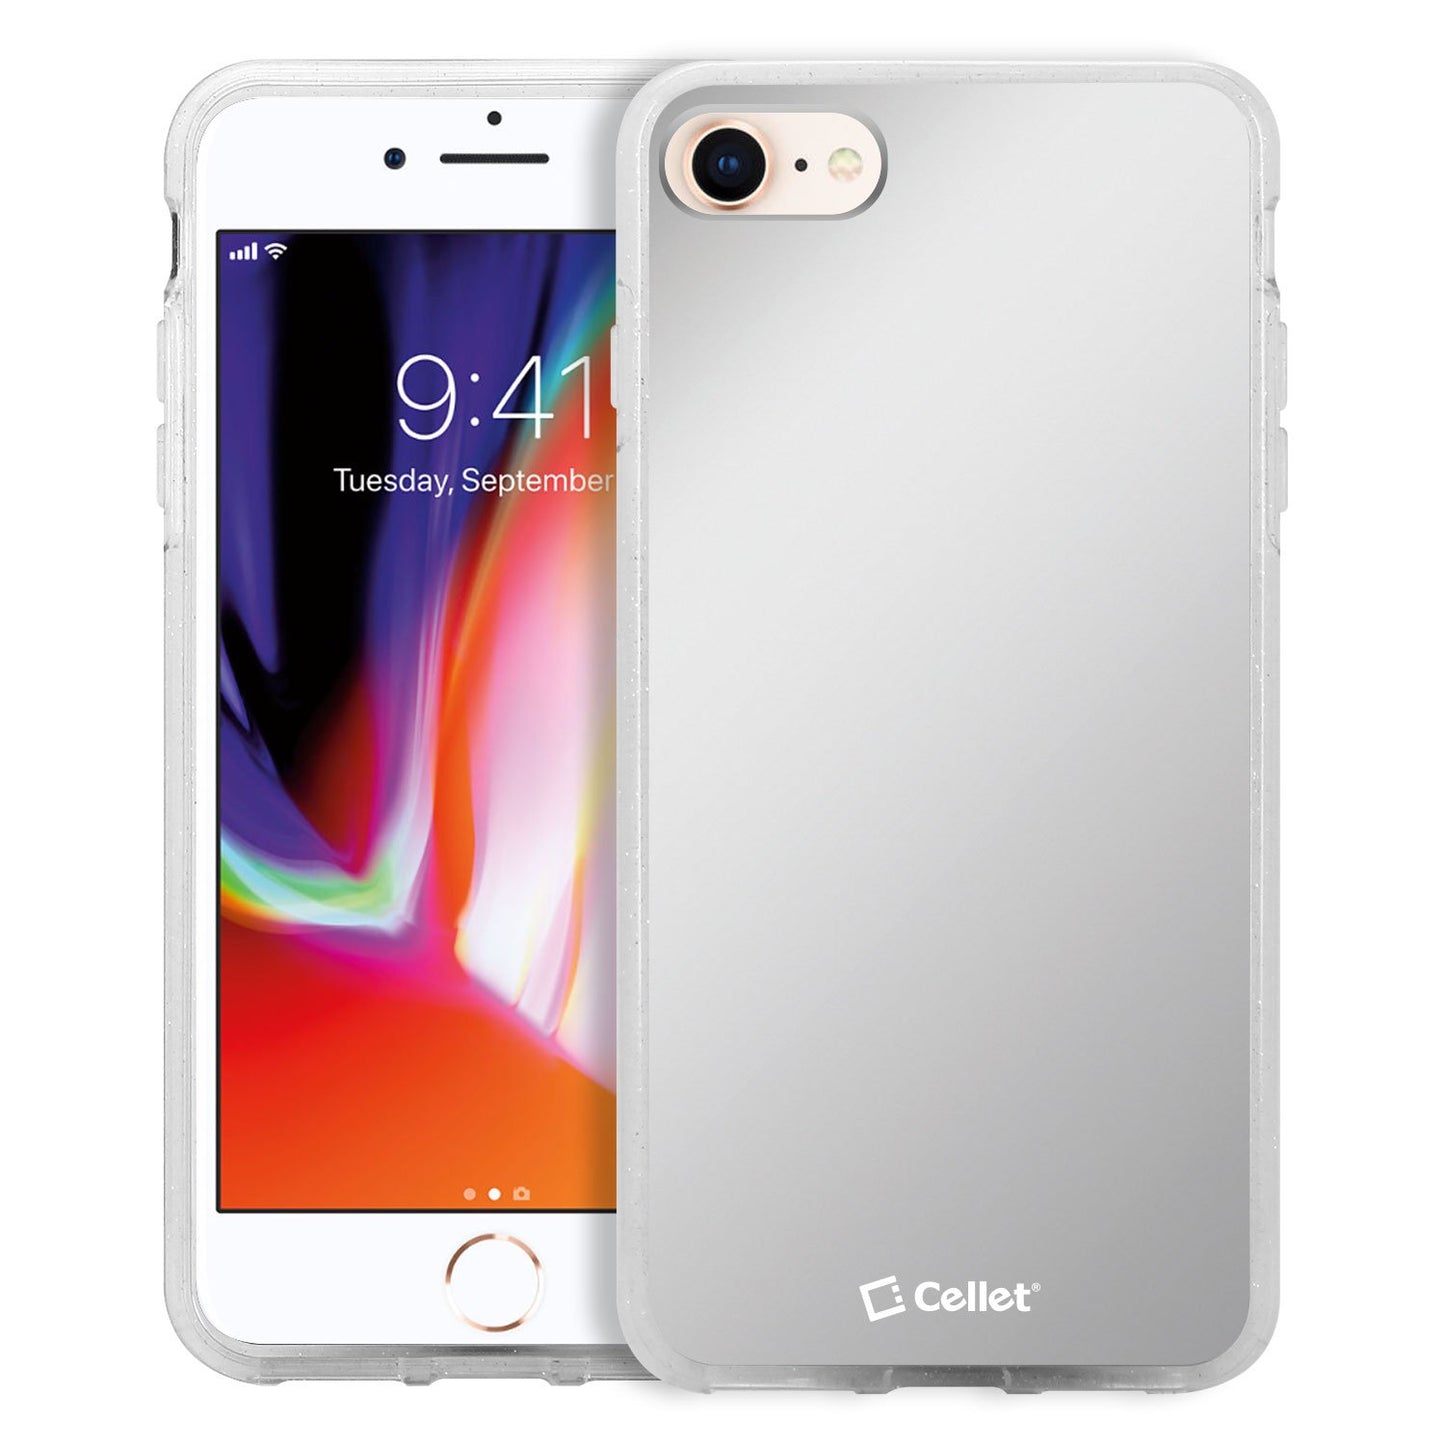 CCIPH8MIR - Apple iPhone 8 Case Protector With Vanity Mirror, Shockproof & Scratch Resistant